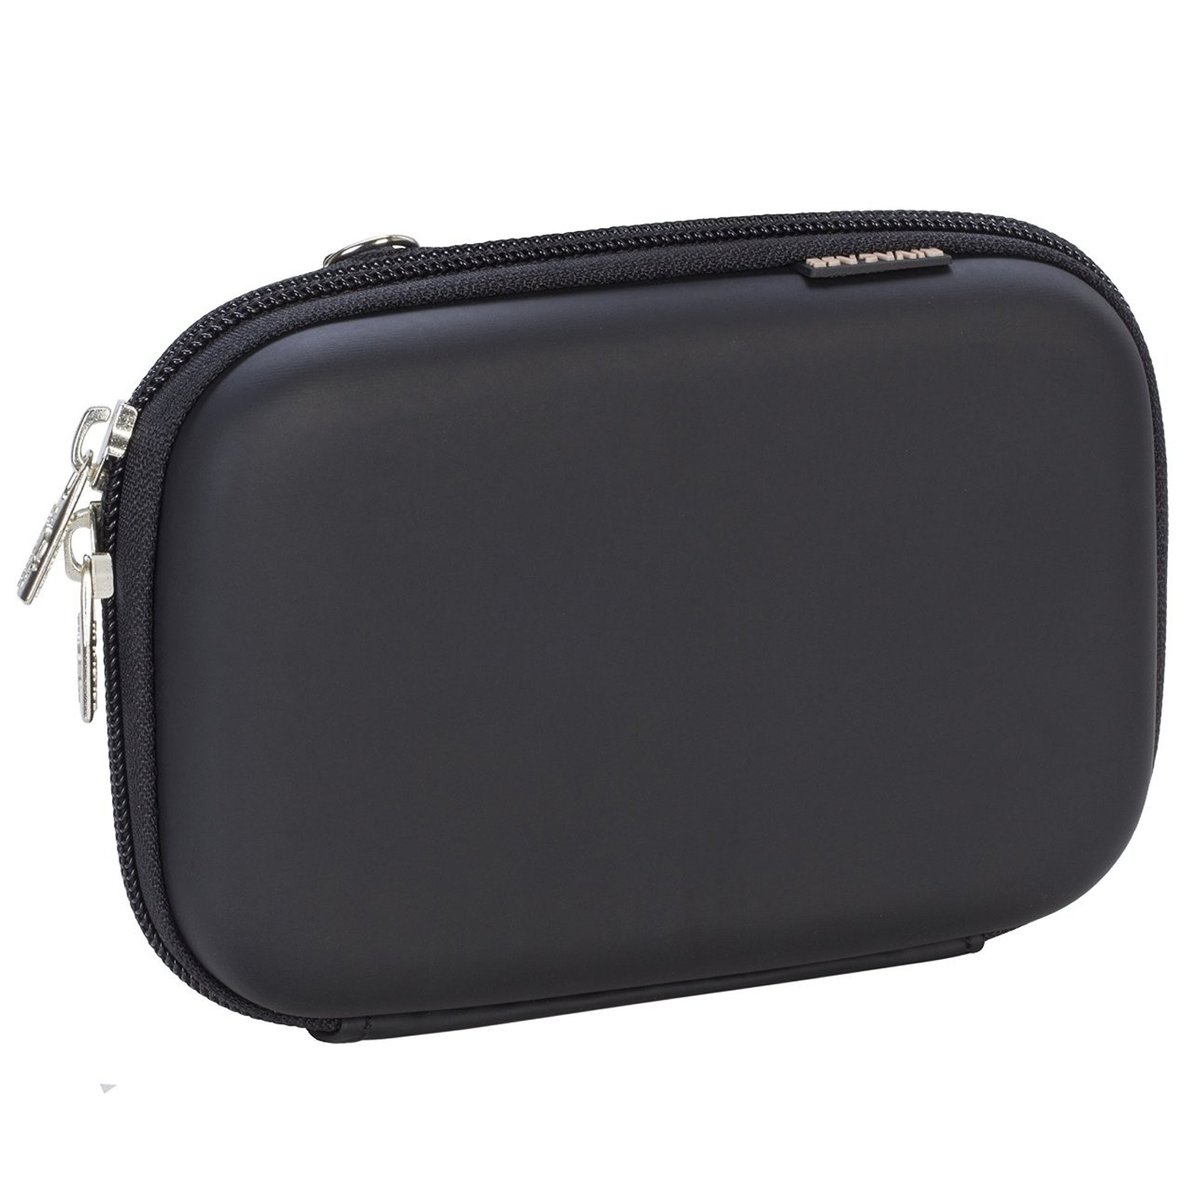 Rivacase Portable Hard Drive or GPS Case 2.5inch 9101